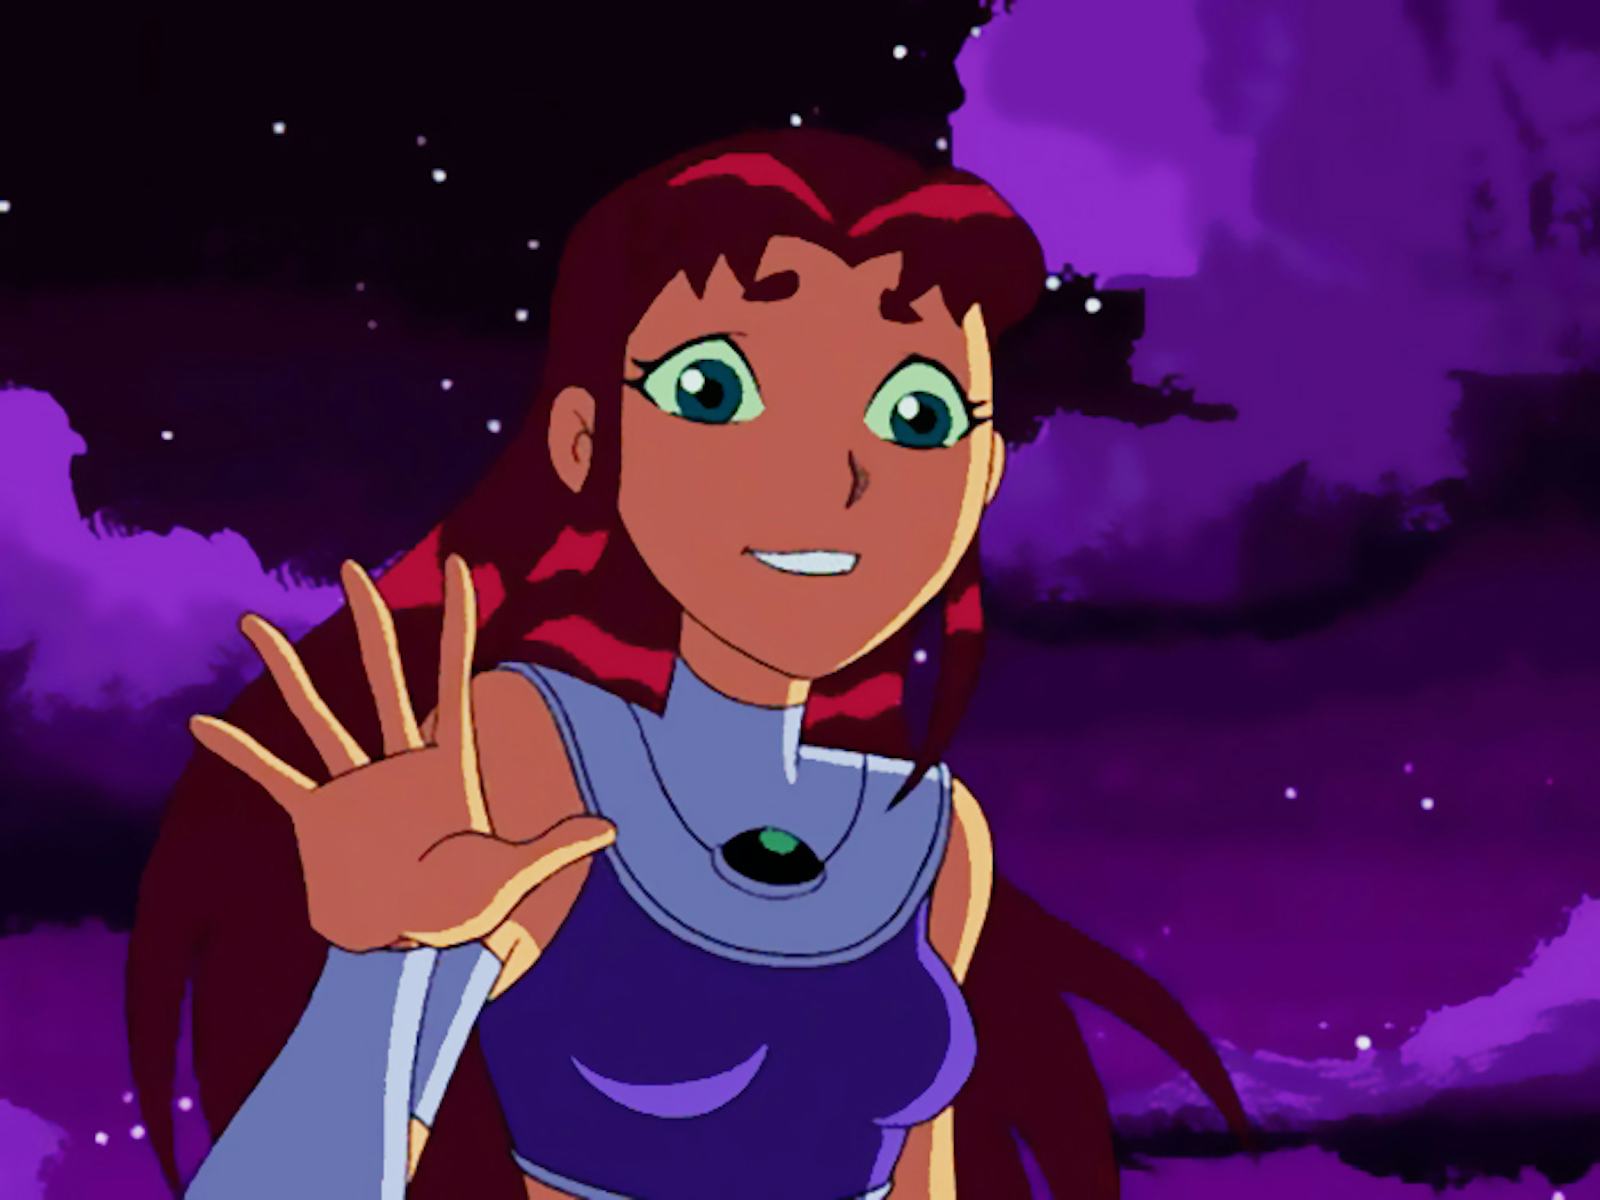 Finish The Teen Titans Starfire Quote To Test Your Knowledge Of The 0570